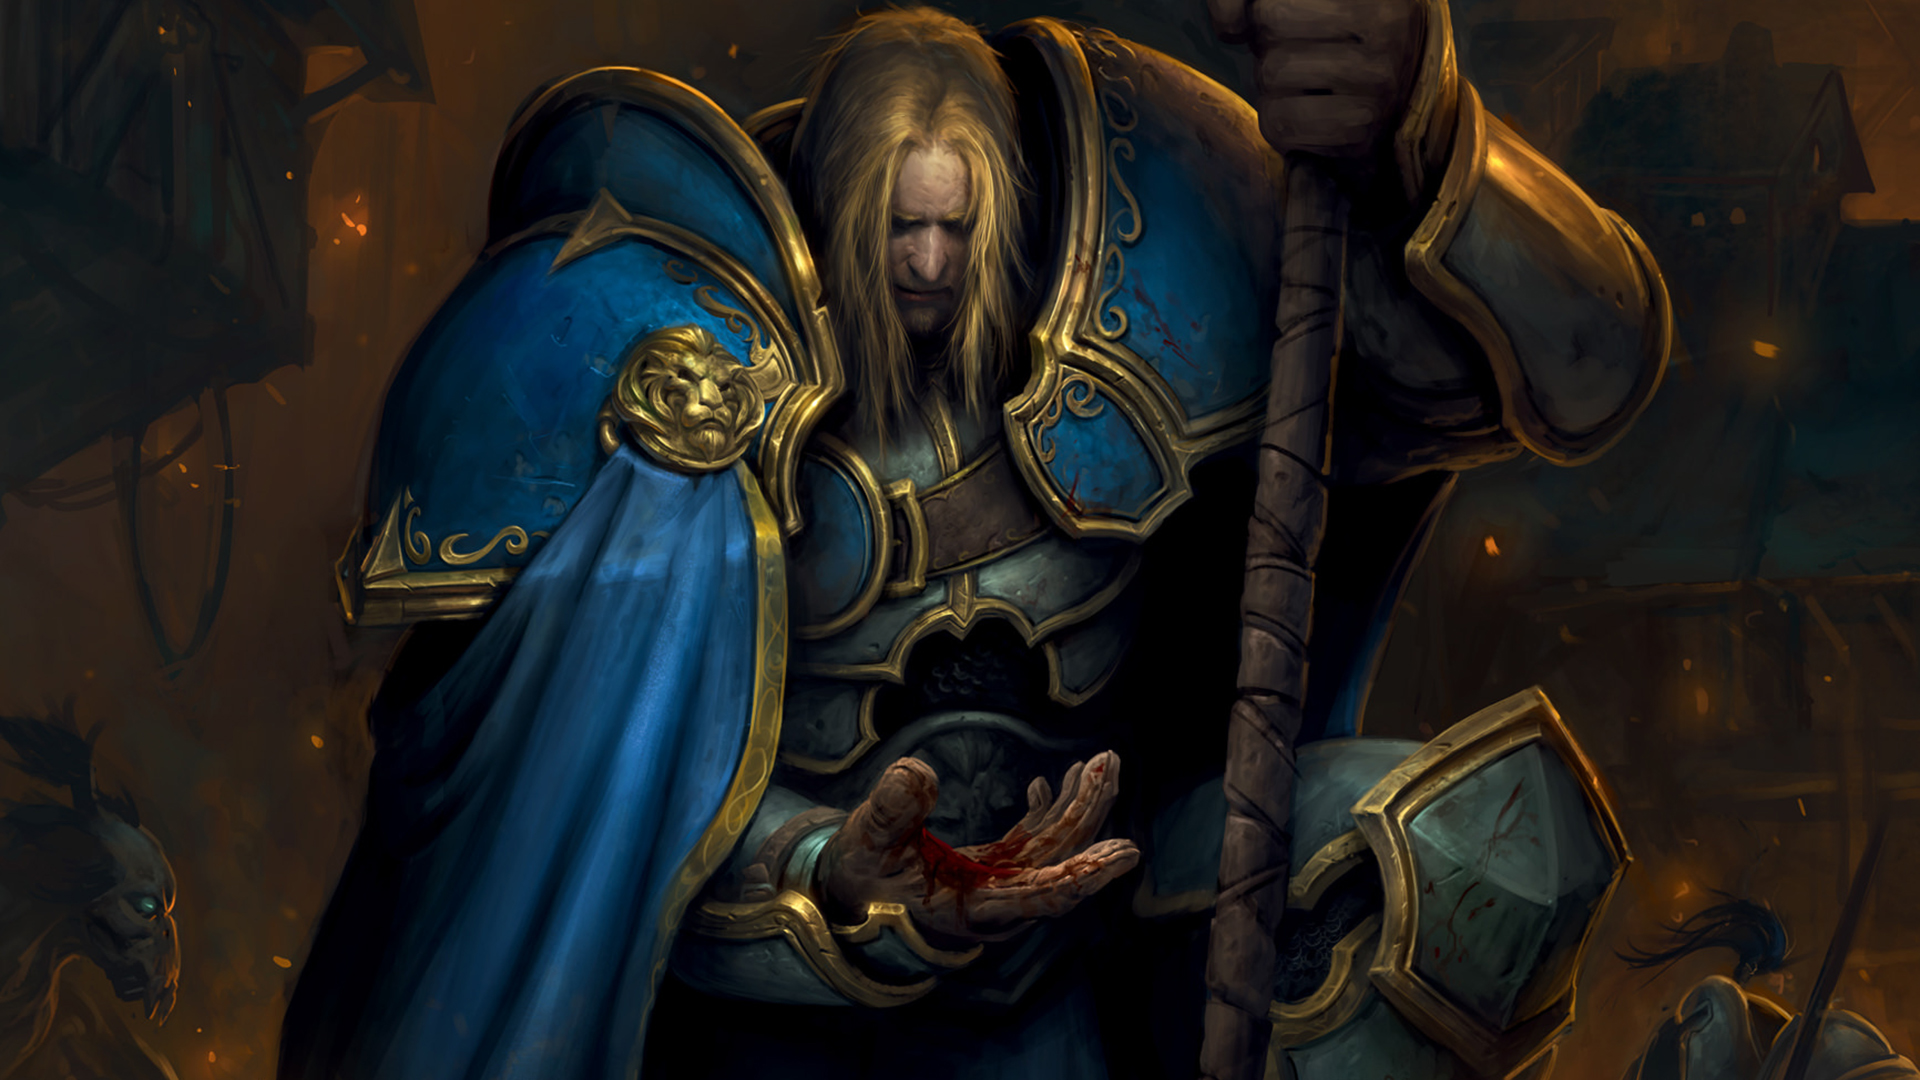 Why the Battle for Azeroth is happening A quick WoW lore primer